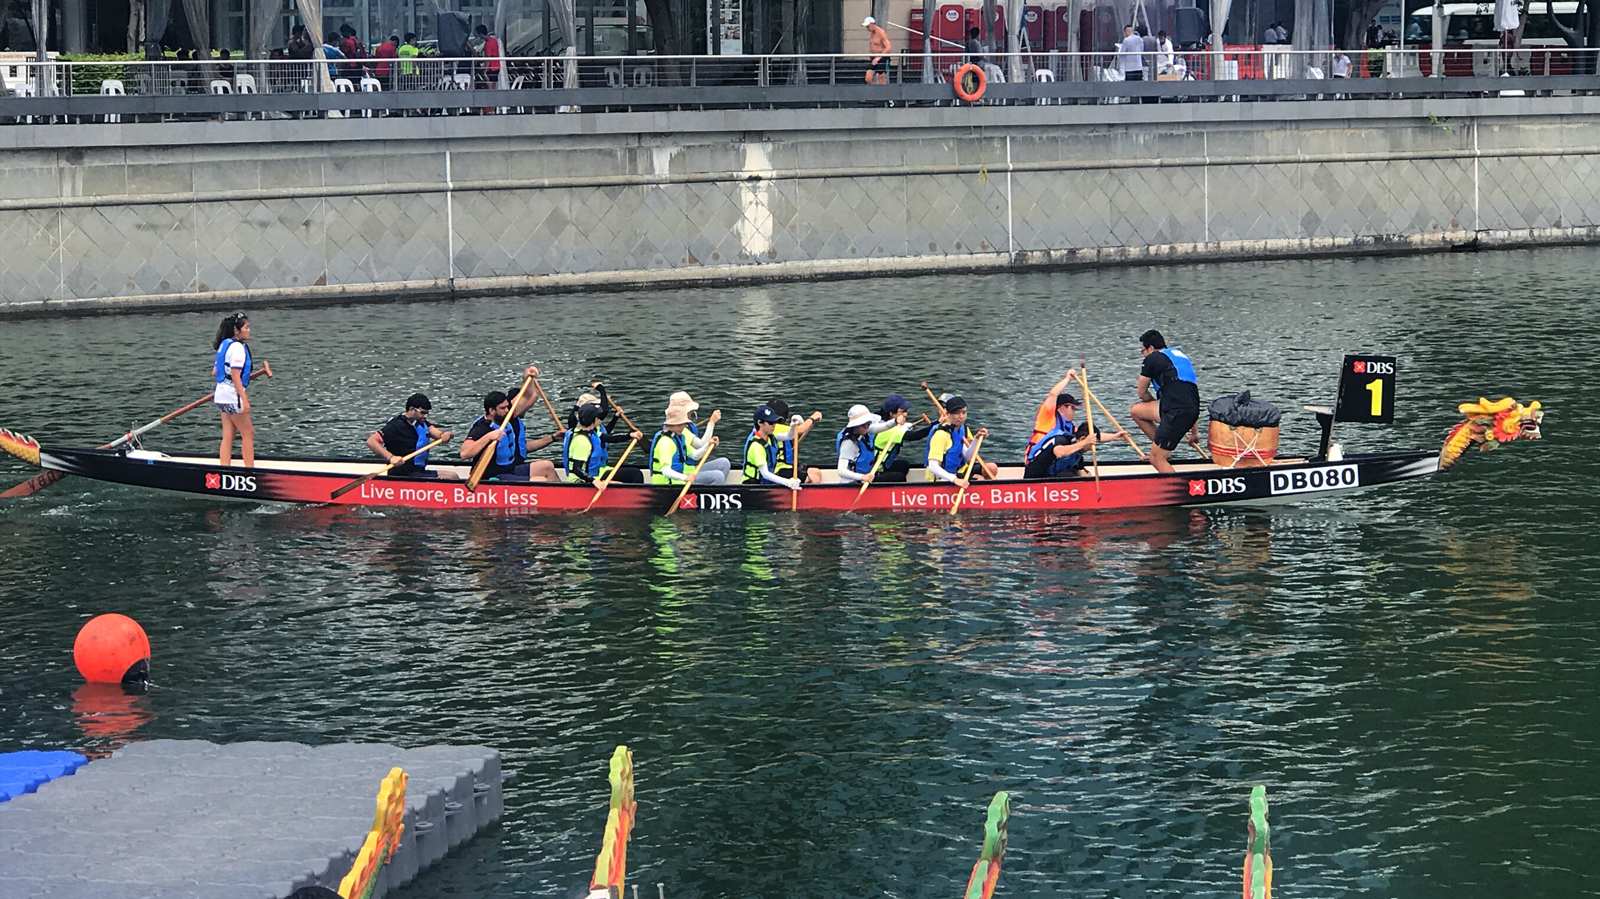 They’re not your regular dragon boaters, and their focus is beyond winning